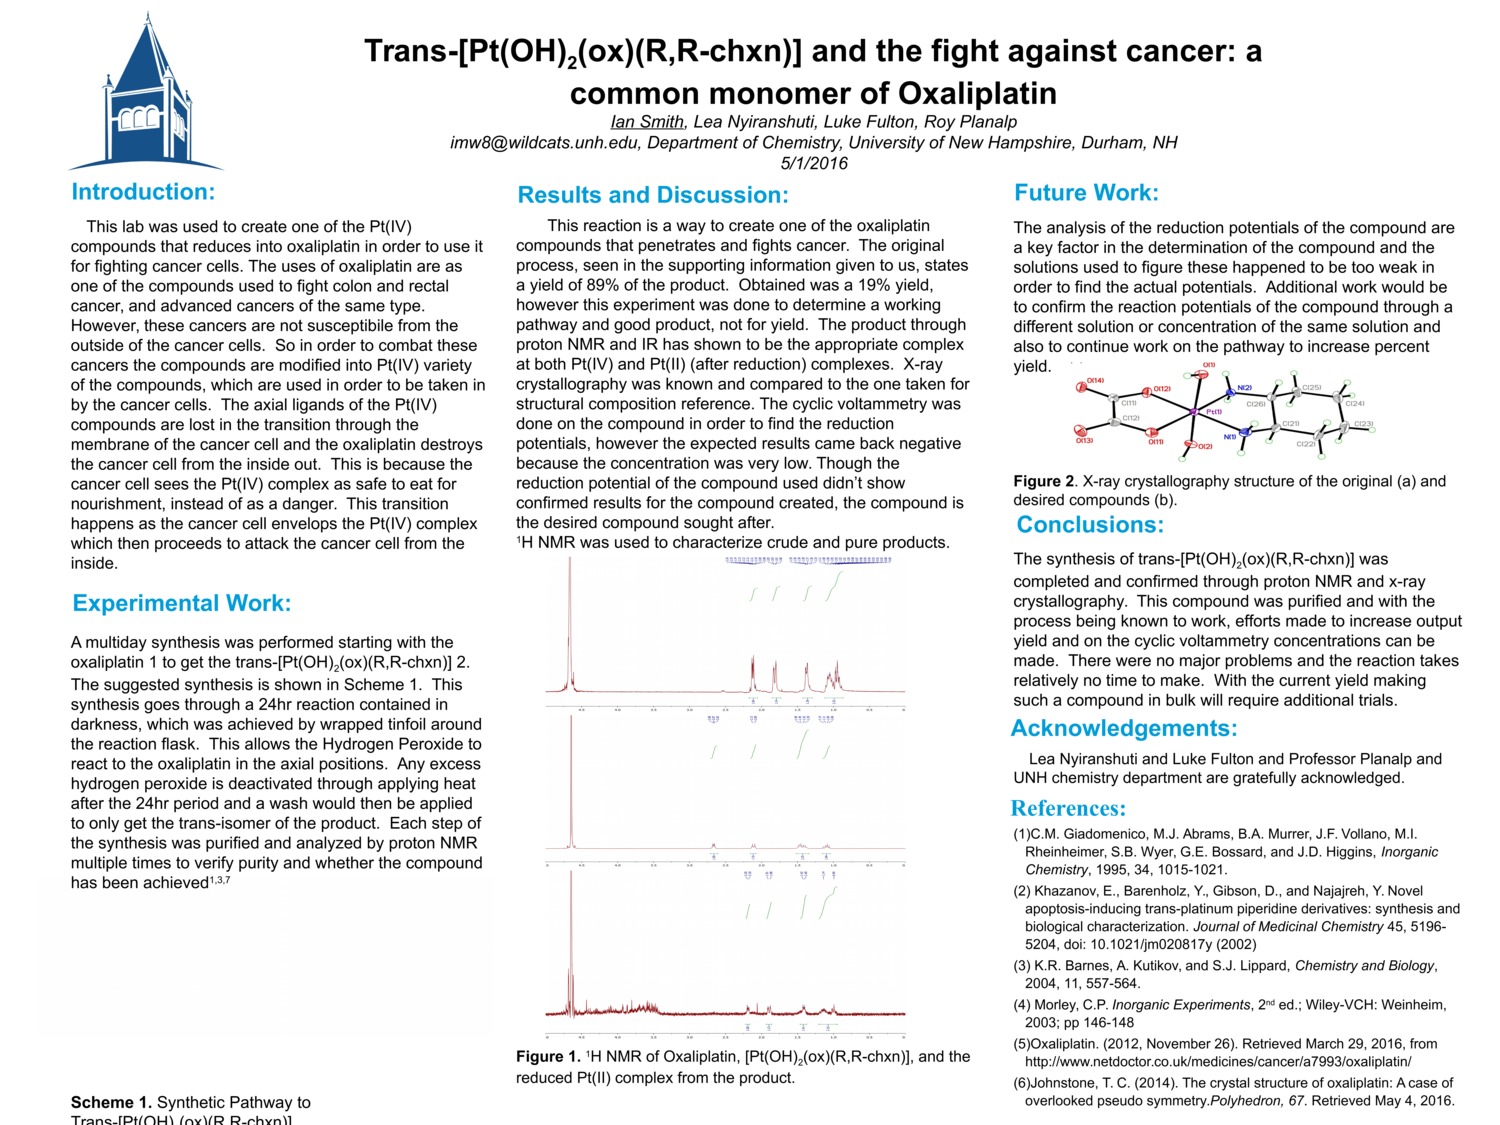 Trans-[Pt(Oh)2(Ox)(R,R-Chxn)] And The Fight Against Cancer: A Common Derivative Of Oxaliplatin by imw8